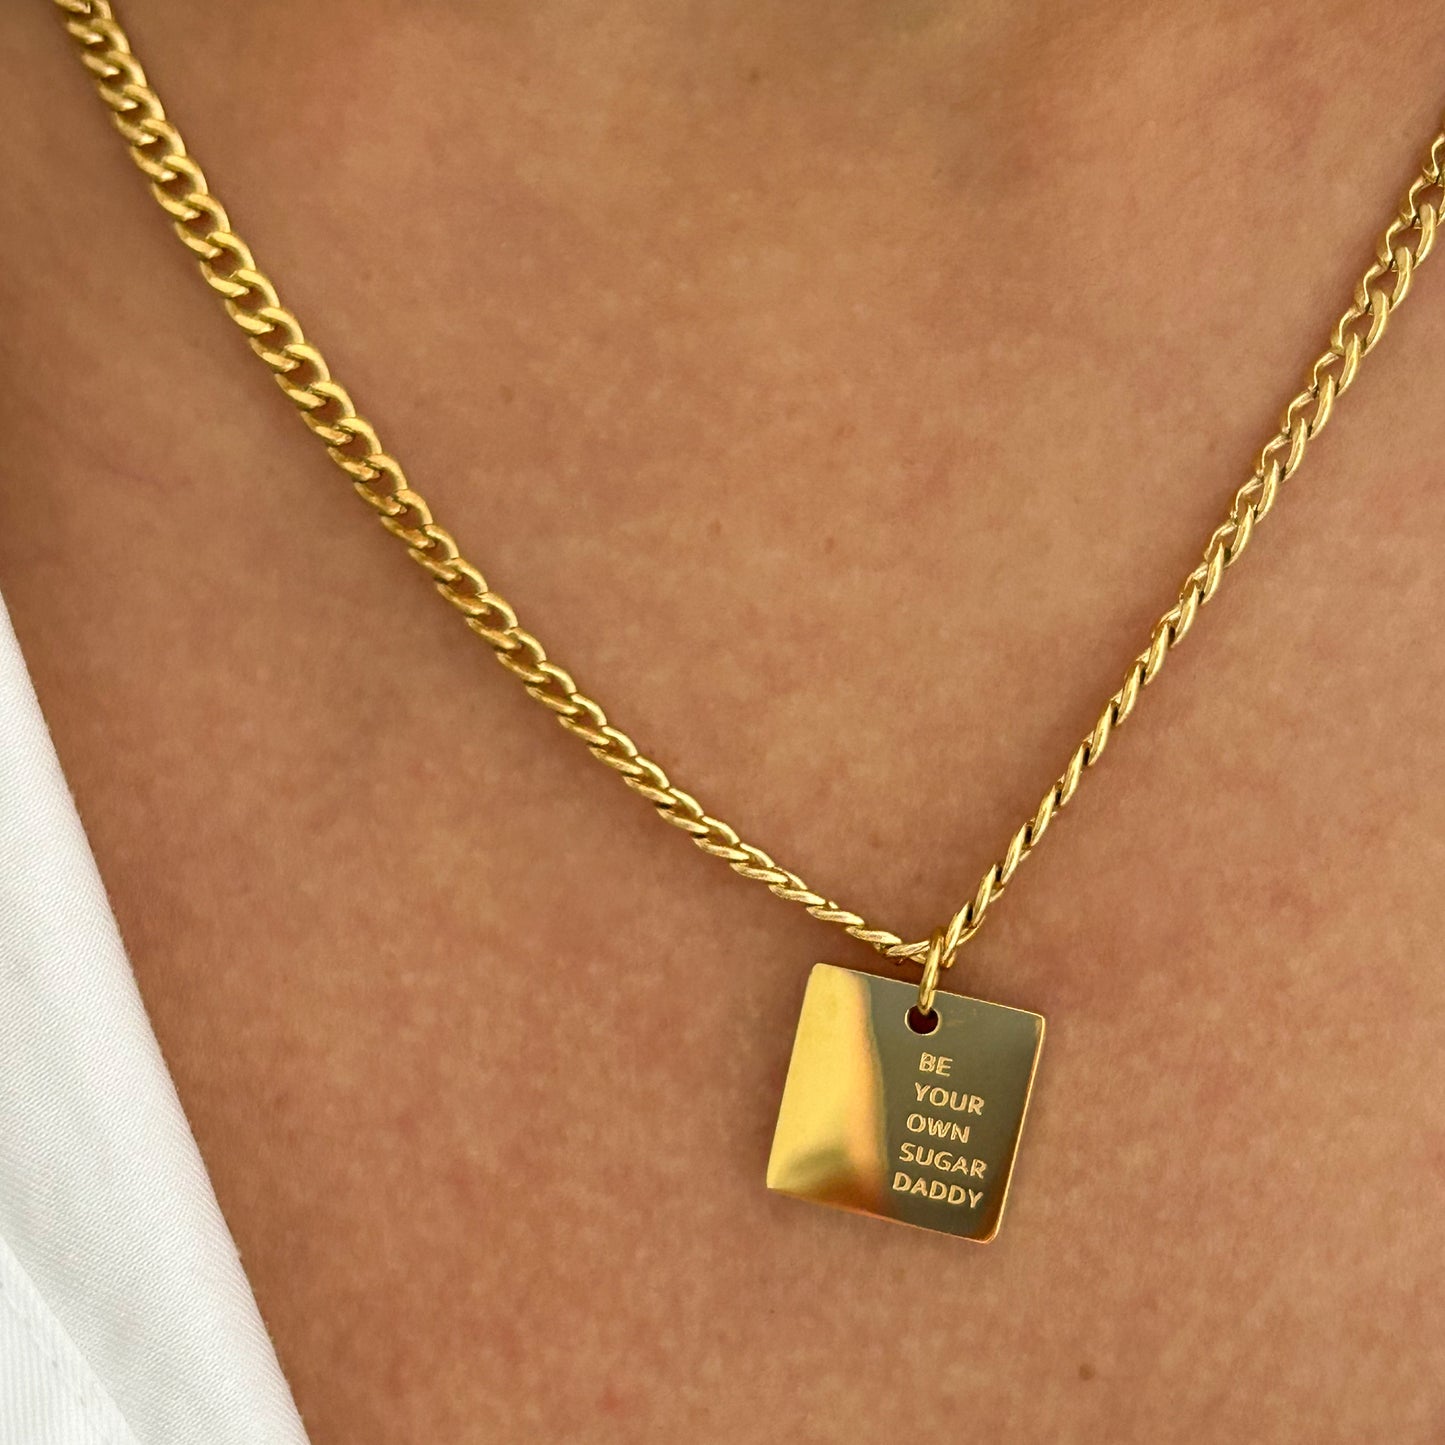 Be Your Own Sugar Daddy Necklace